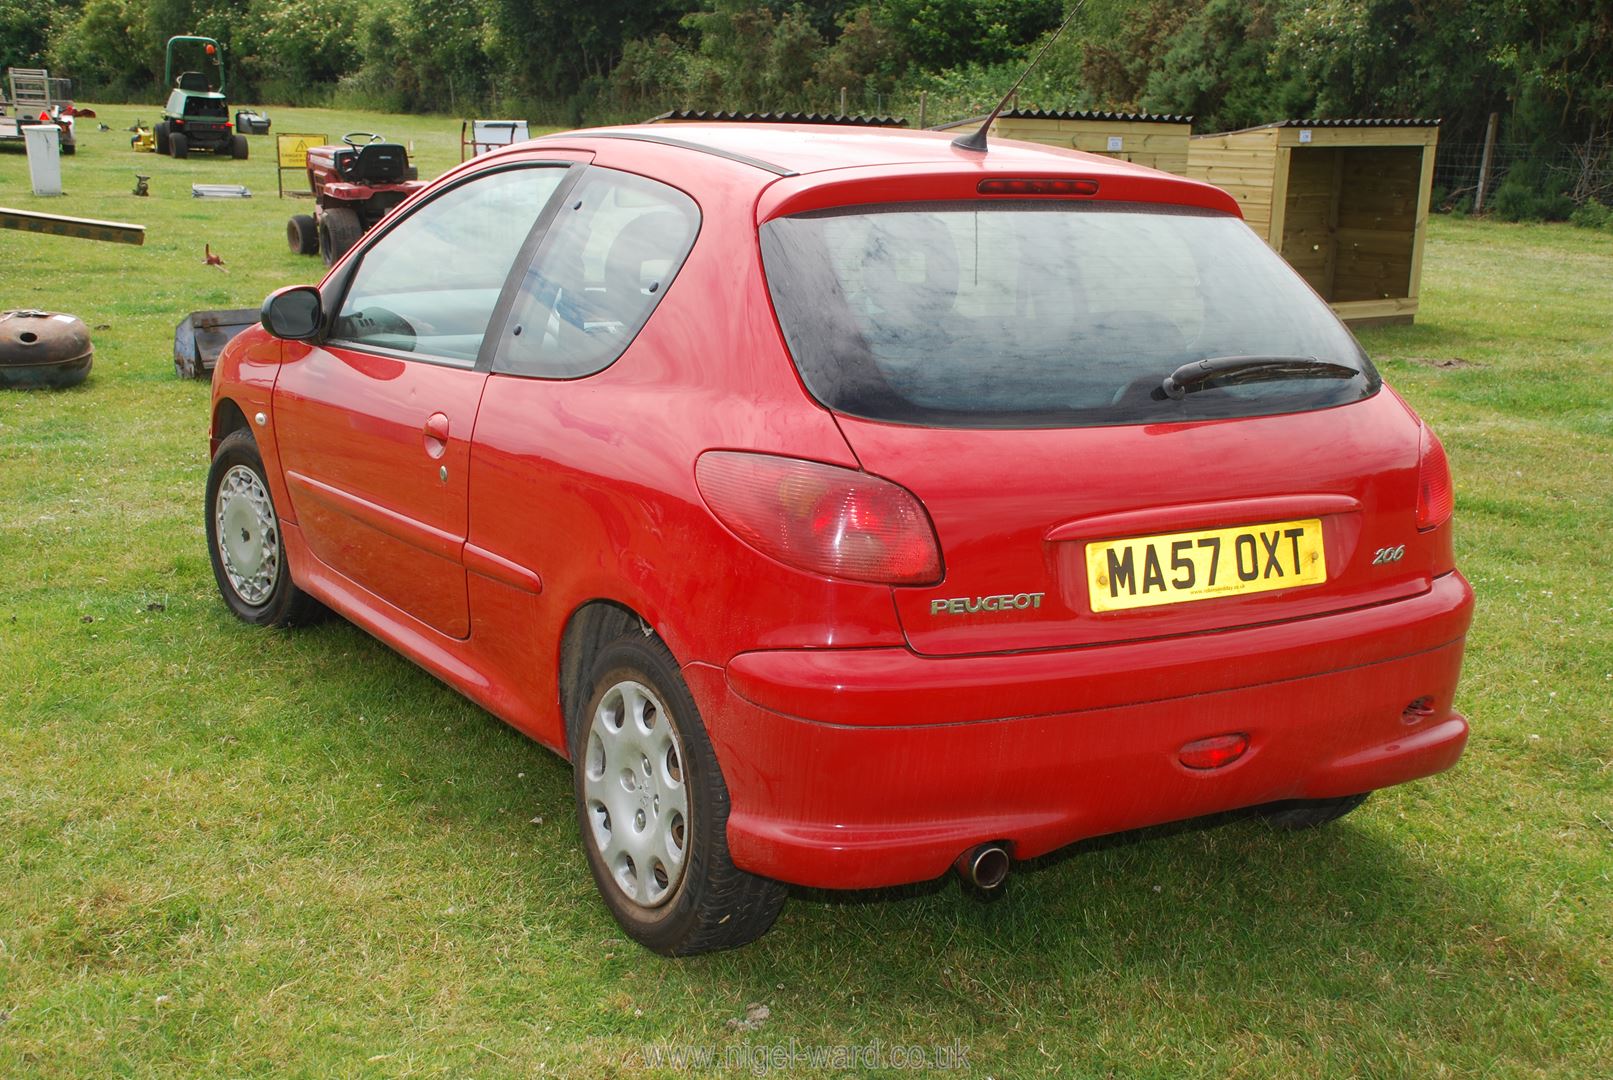 A petrol engined Peugeot 206 hatchback 1.4 Look 3 door in red - Image 4 of 4